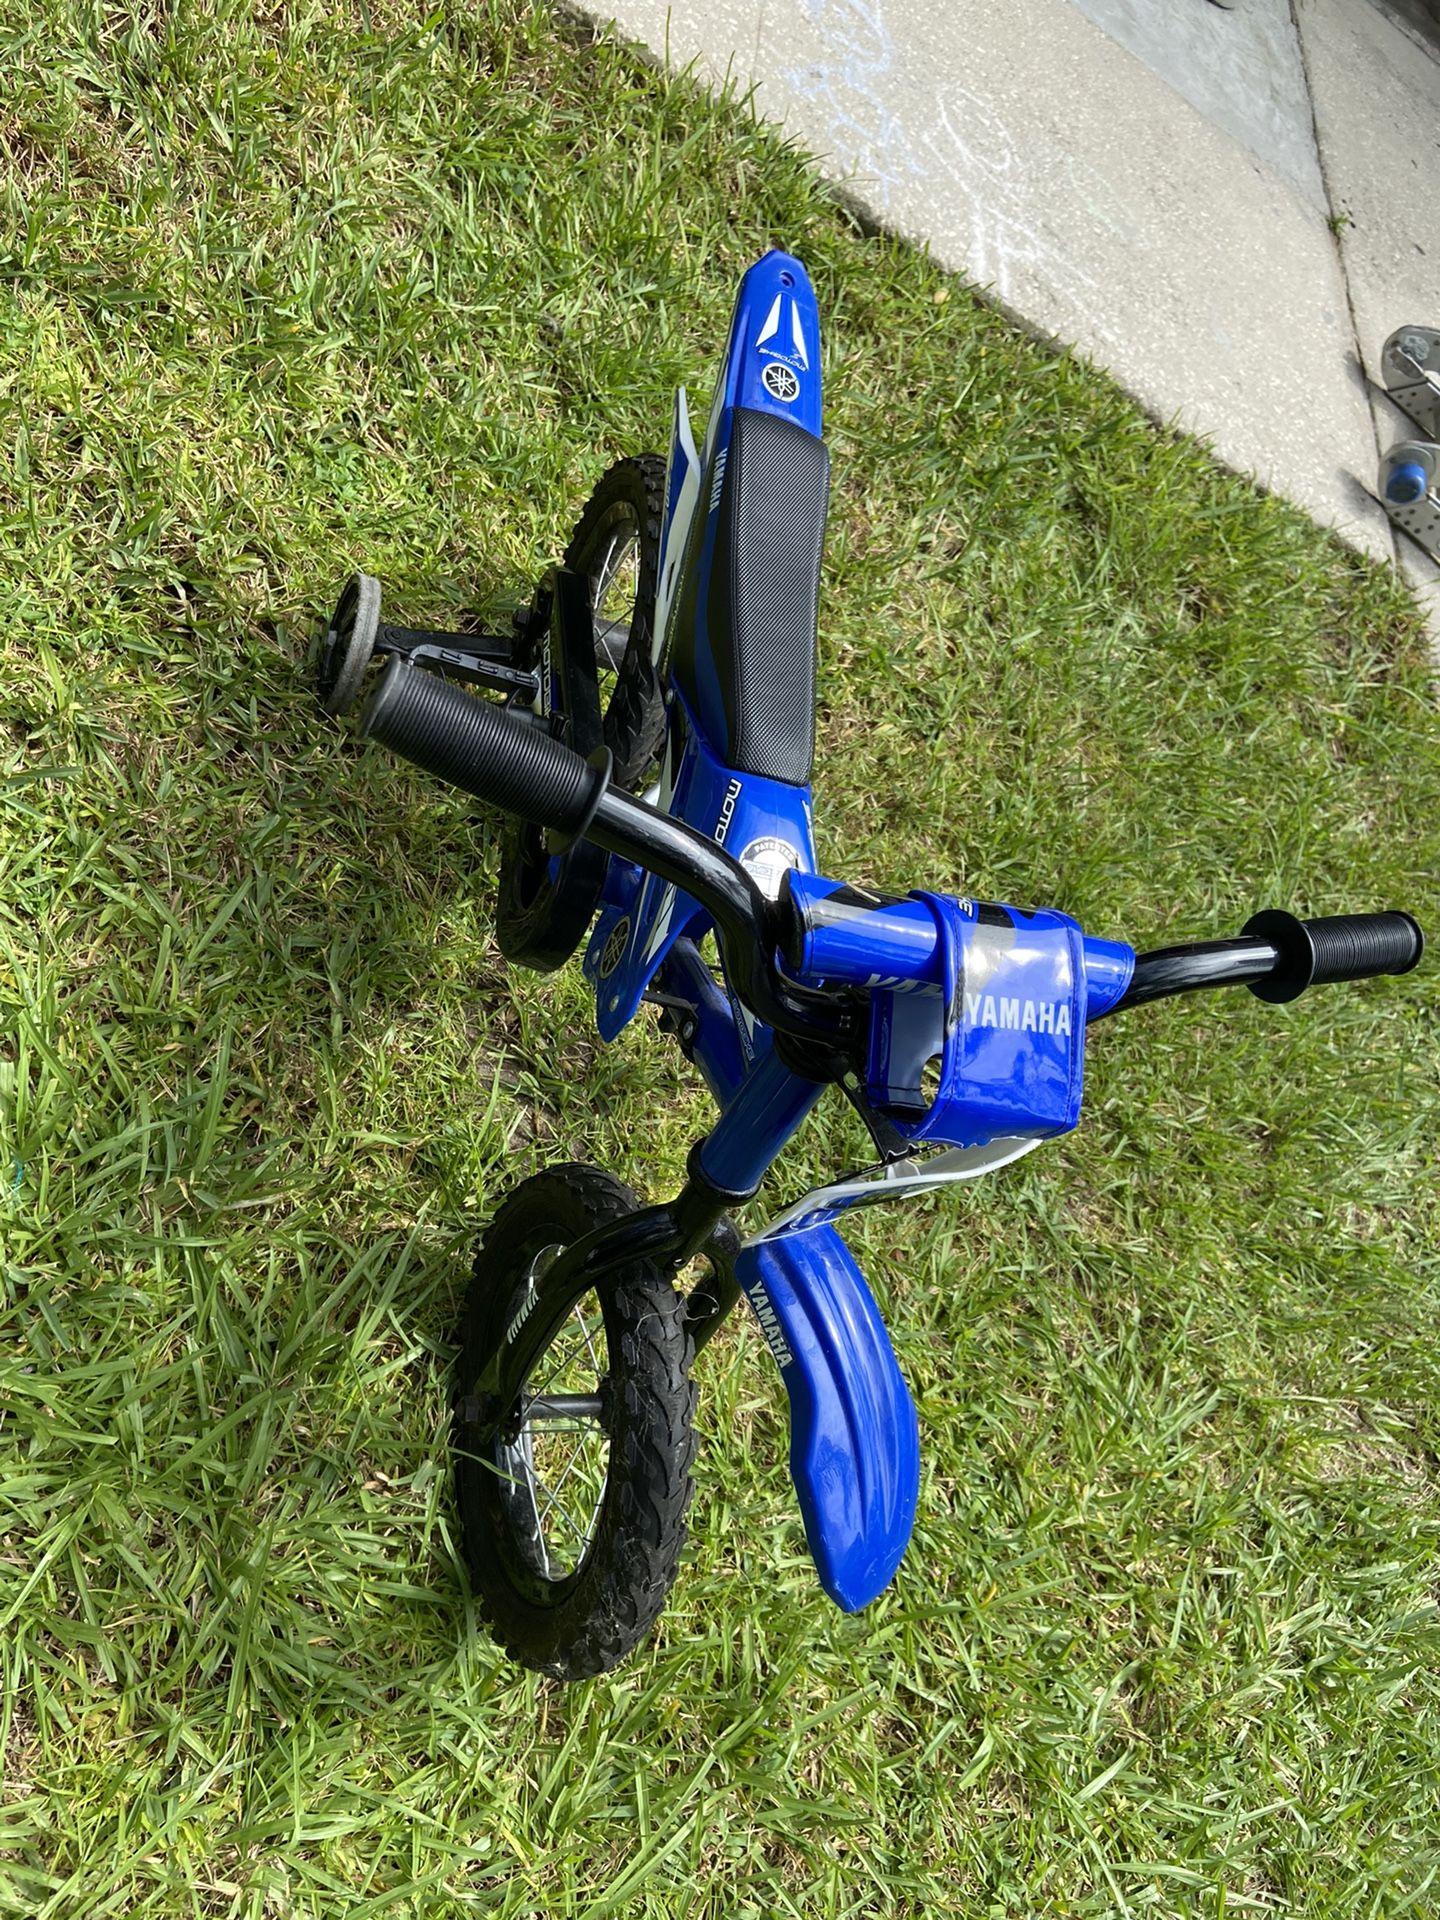 Motorbike Yamaha, Blue And Black, Good Condition, 2 To 6 Years Old Boy, 